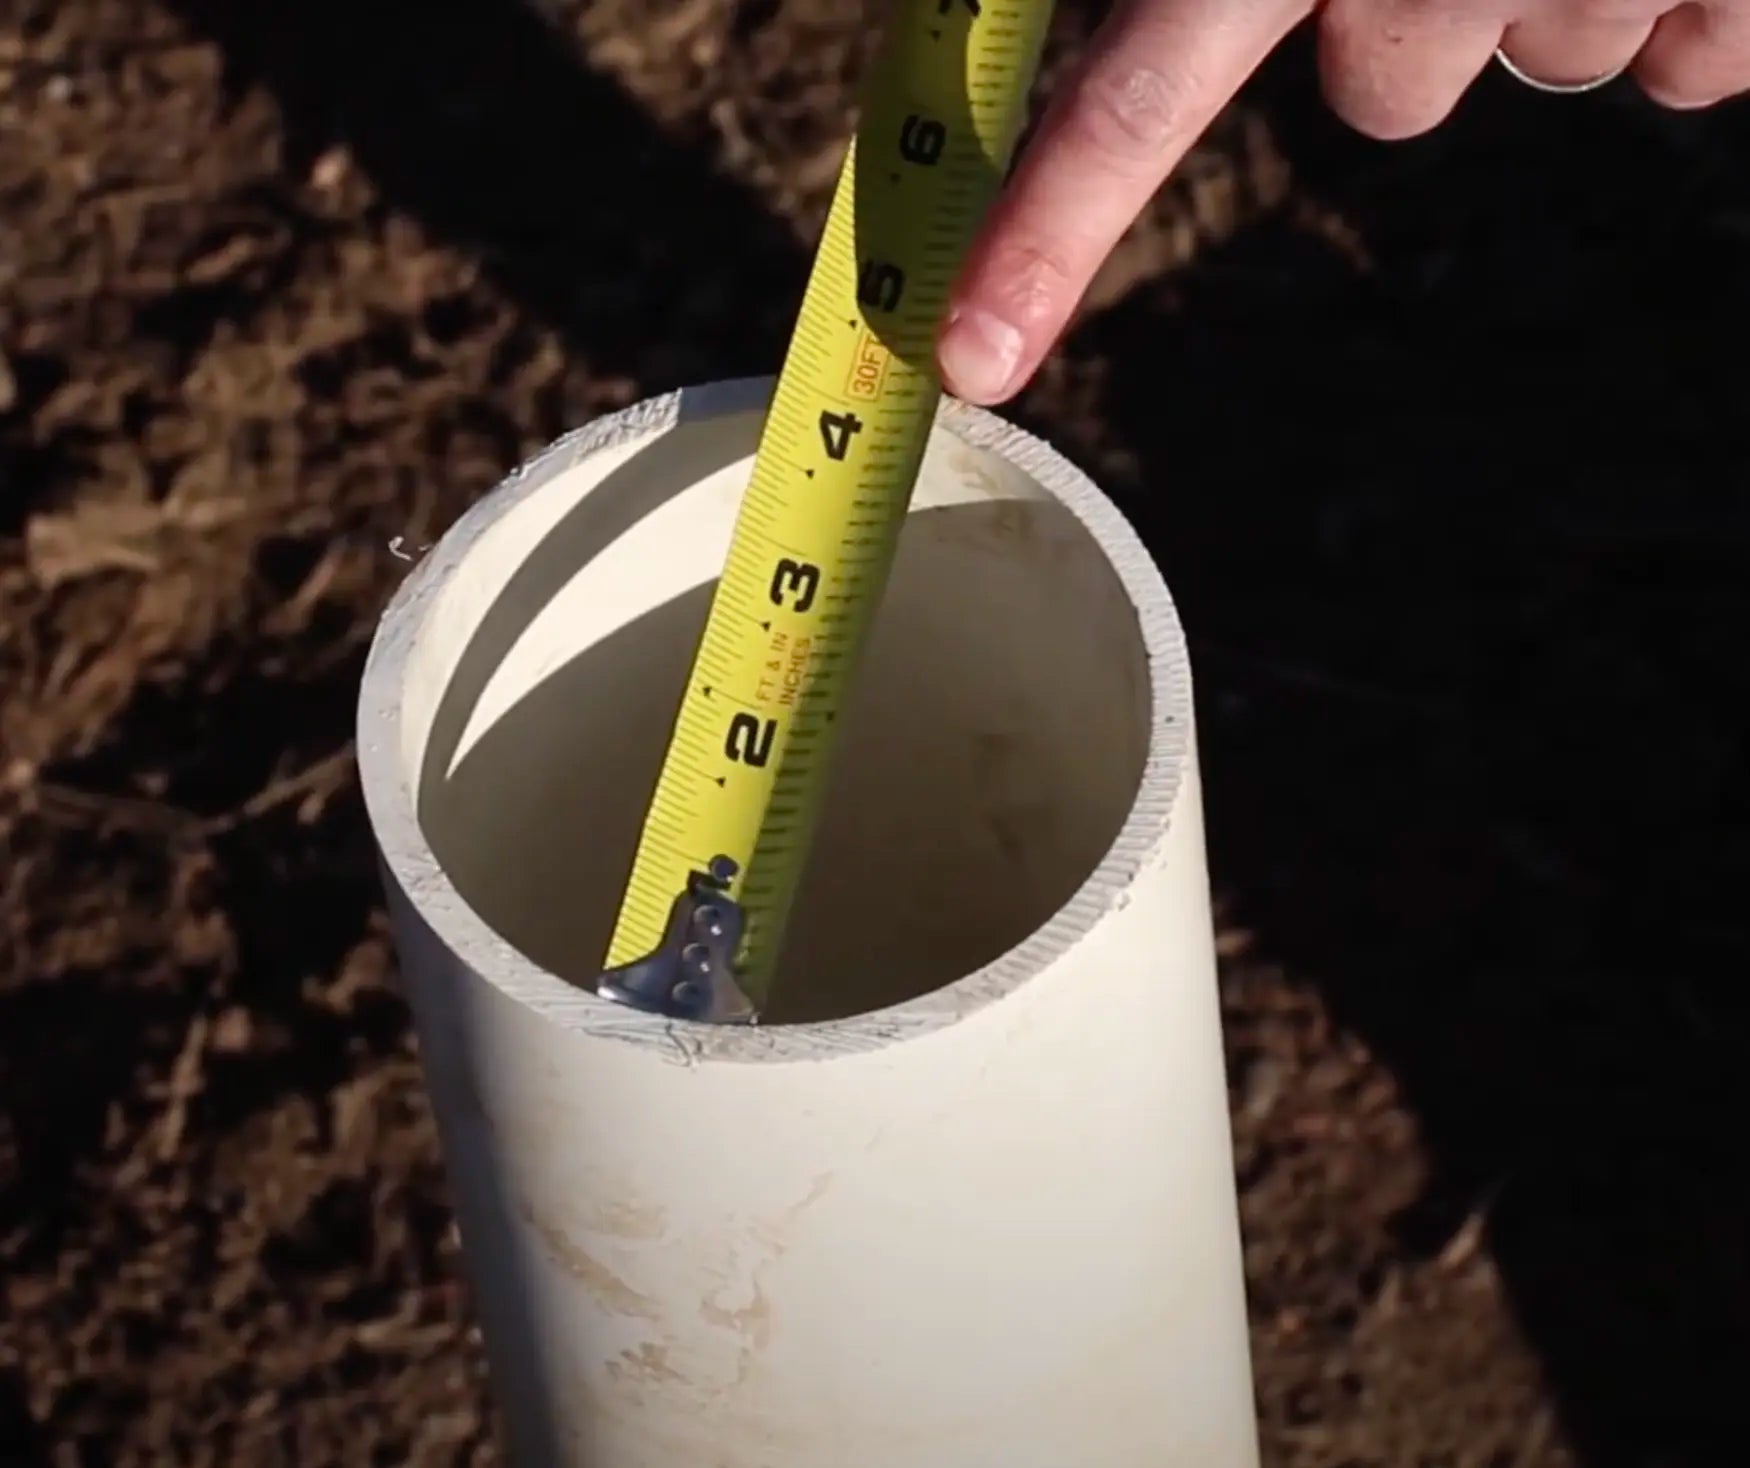 How to Measure the Well Casing Diameter